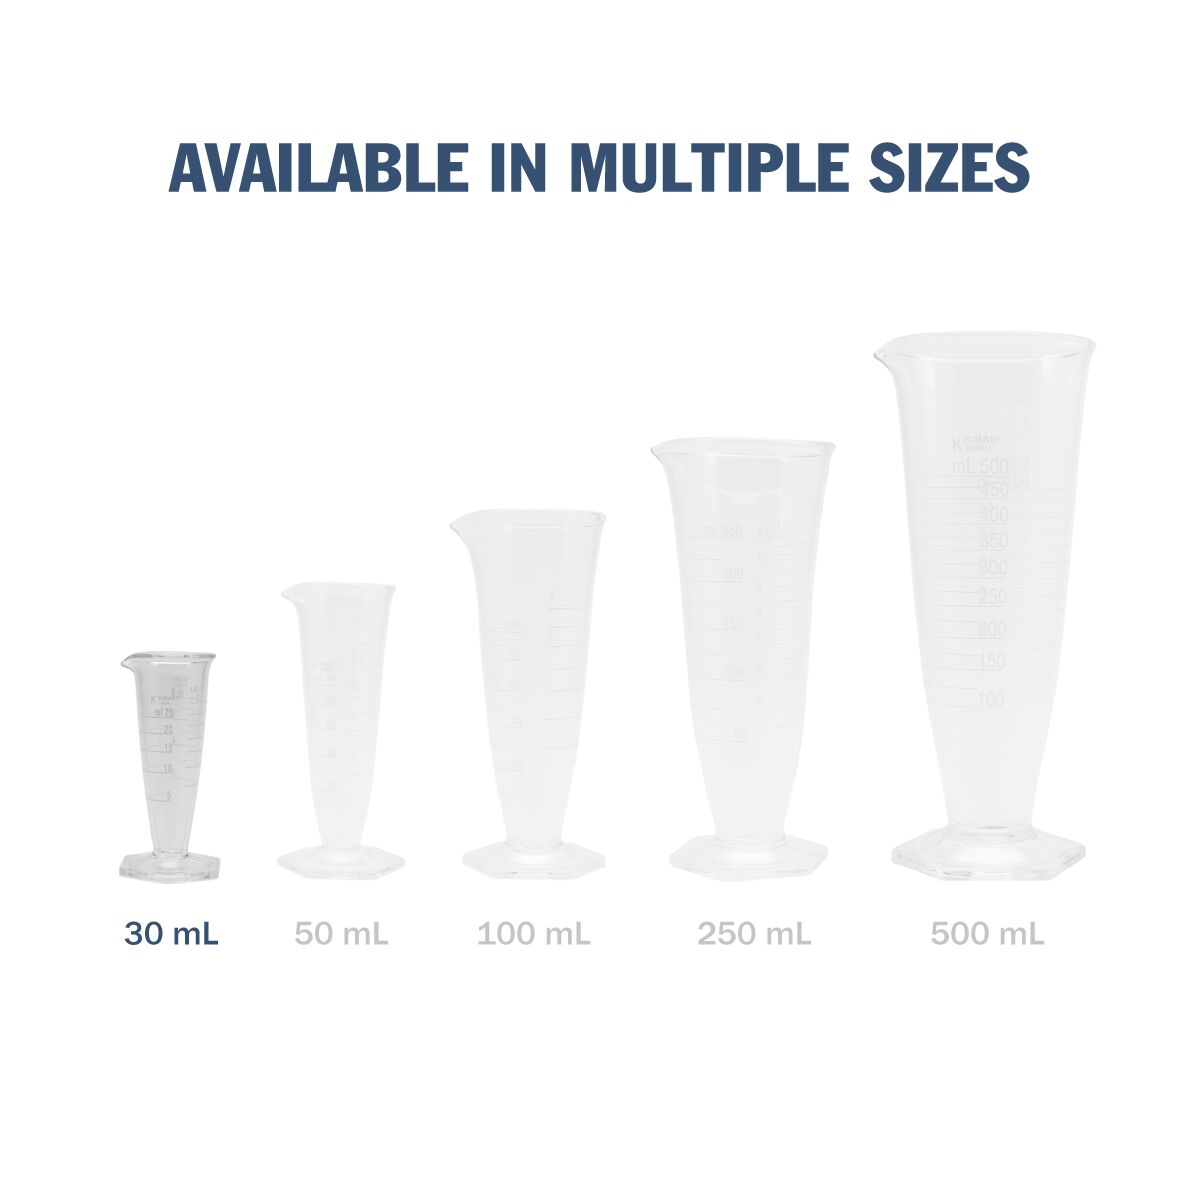 Kimax® Glass Pharmaceutical Dual-Scale Graduates available in multiple sizes - 30 mL